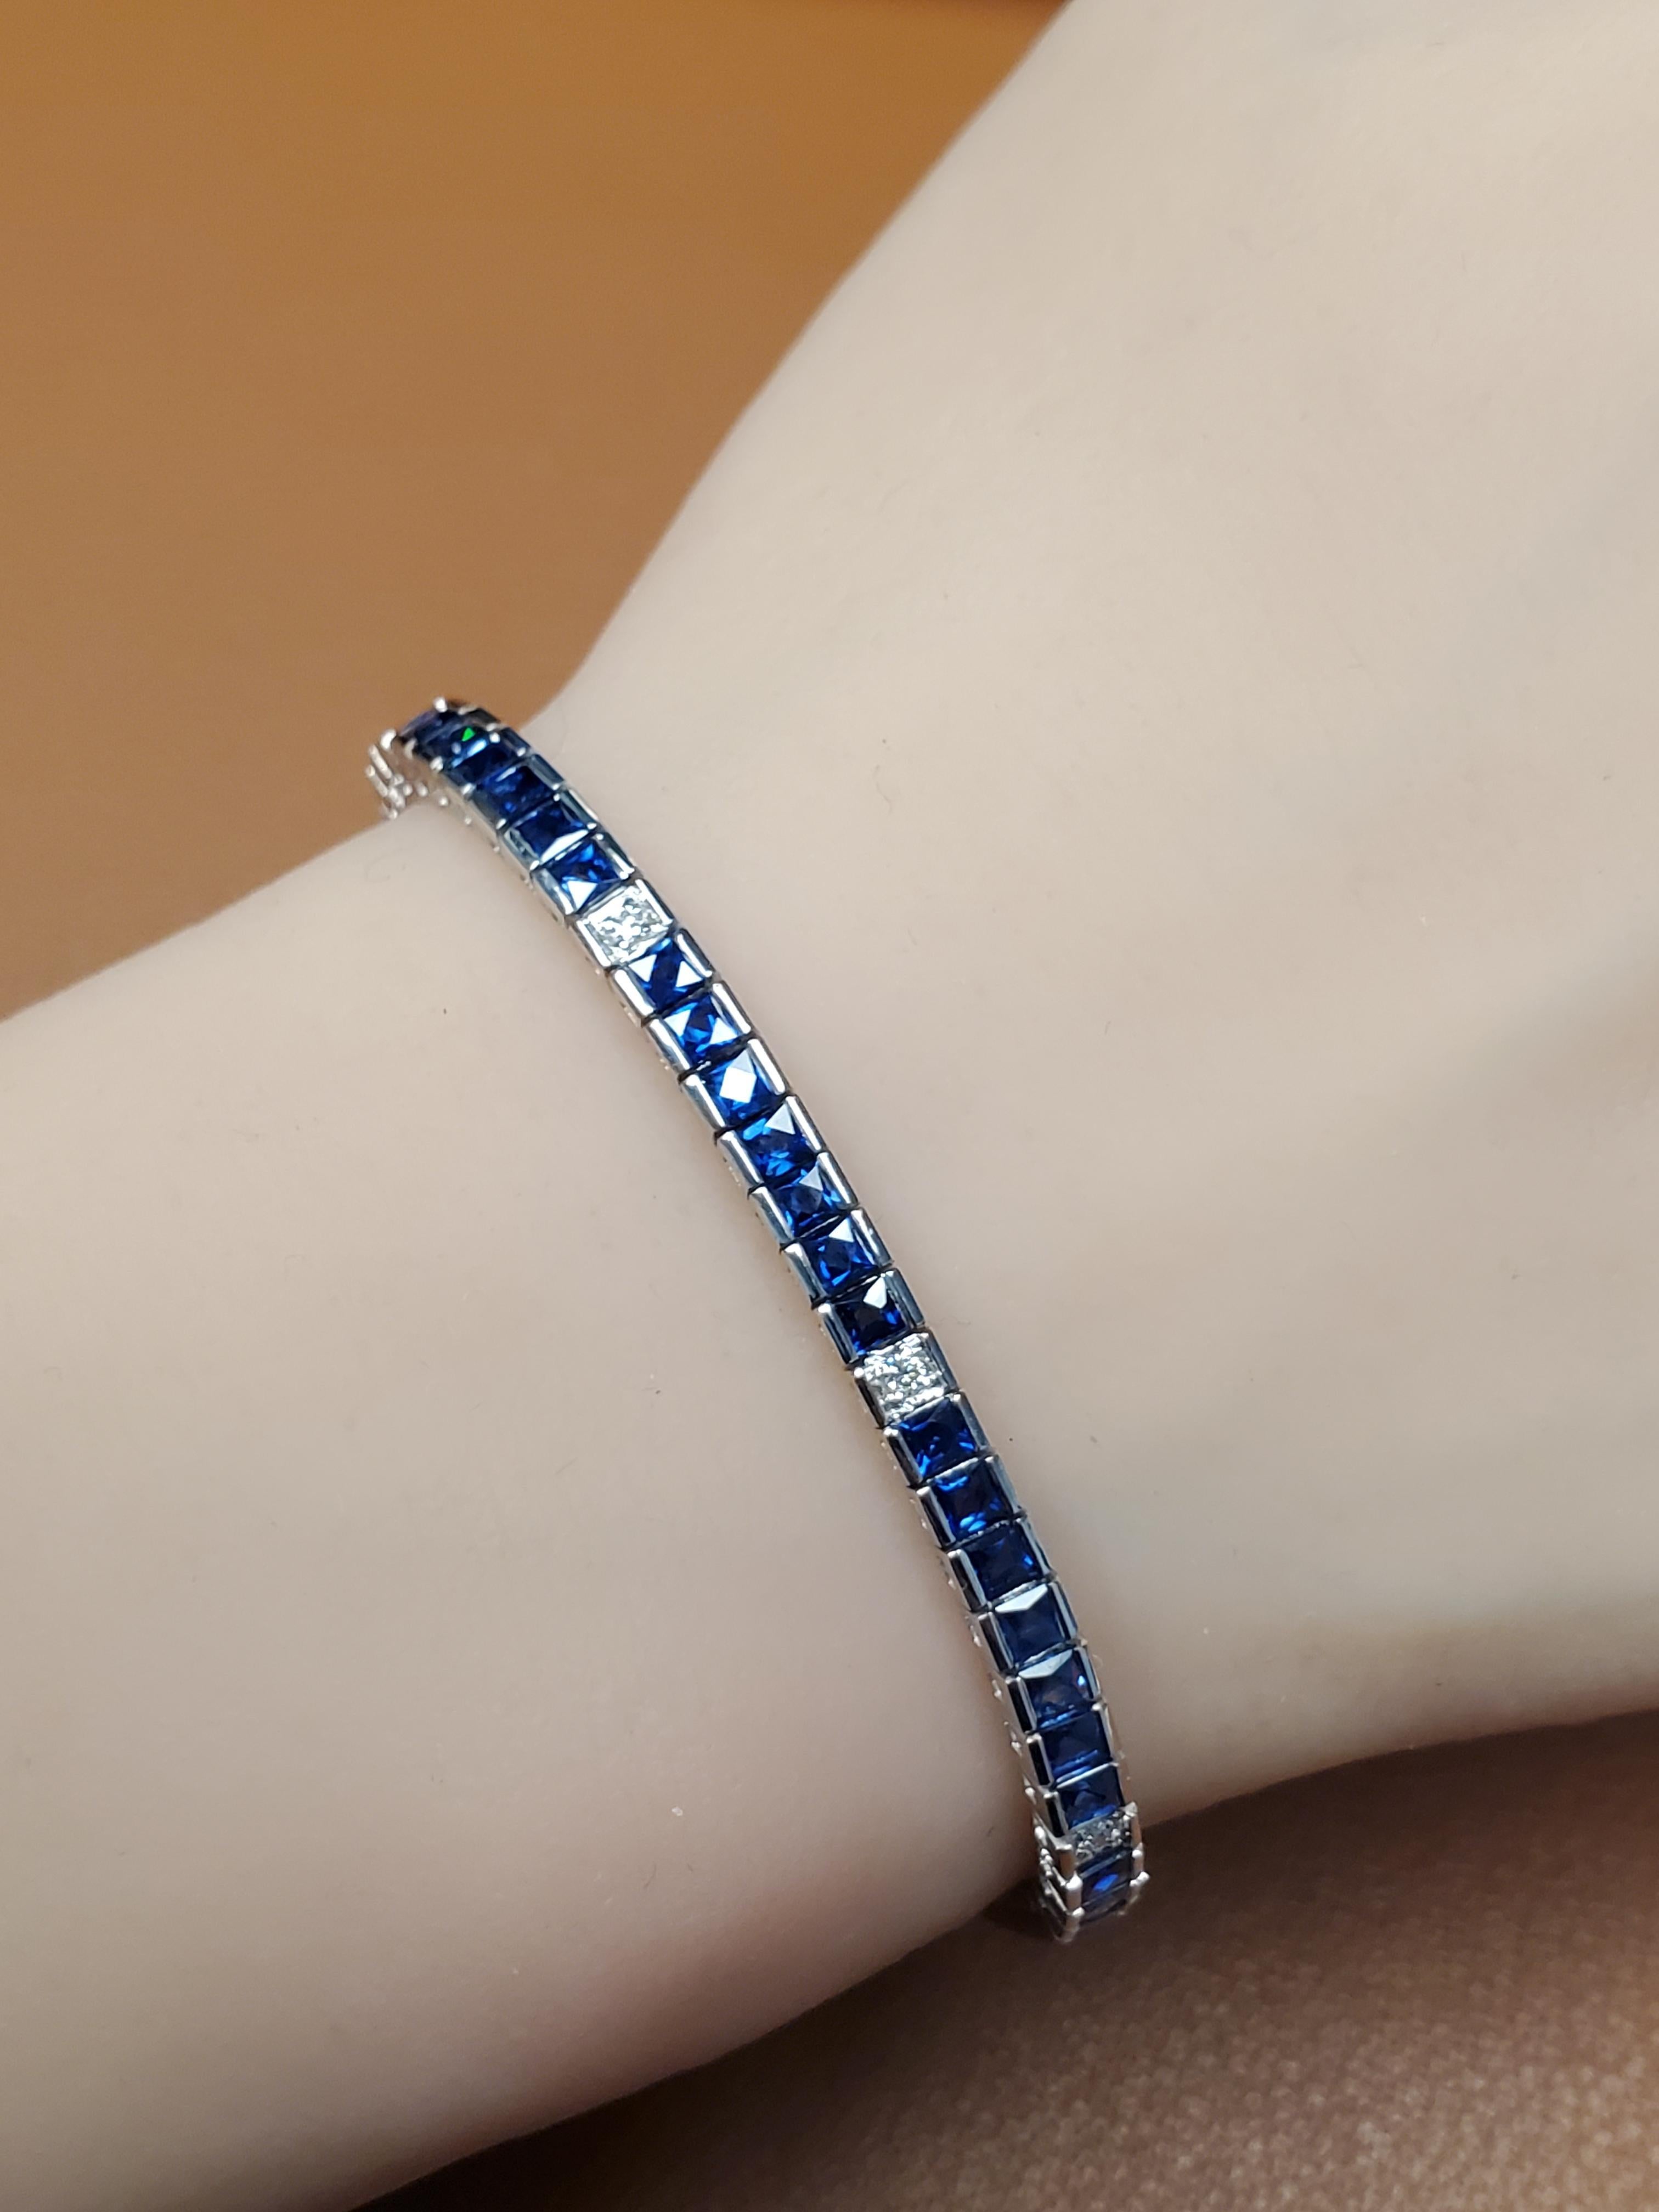 Listed is this 18k white gold natural Ceylon blue sapphire and diamond bracelet. This bracelet features white vs diamonds surrounded by Peruzzi cut blue sapphires. 7